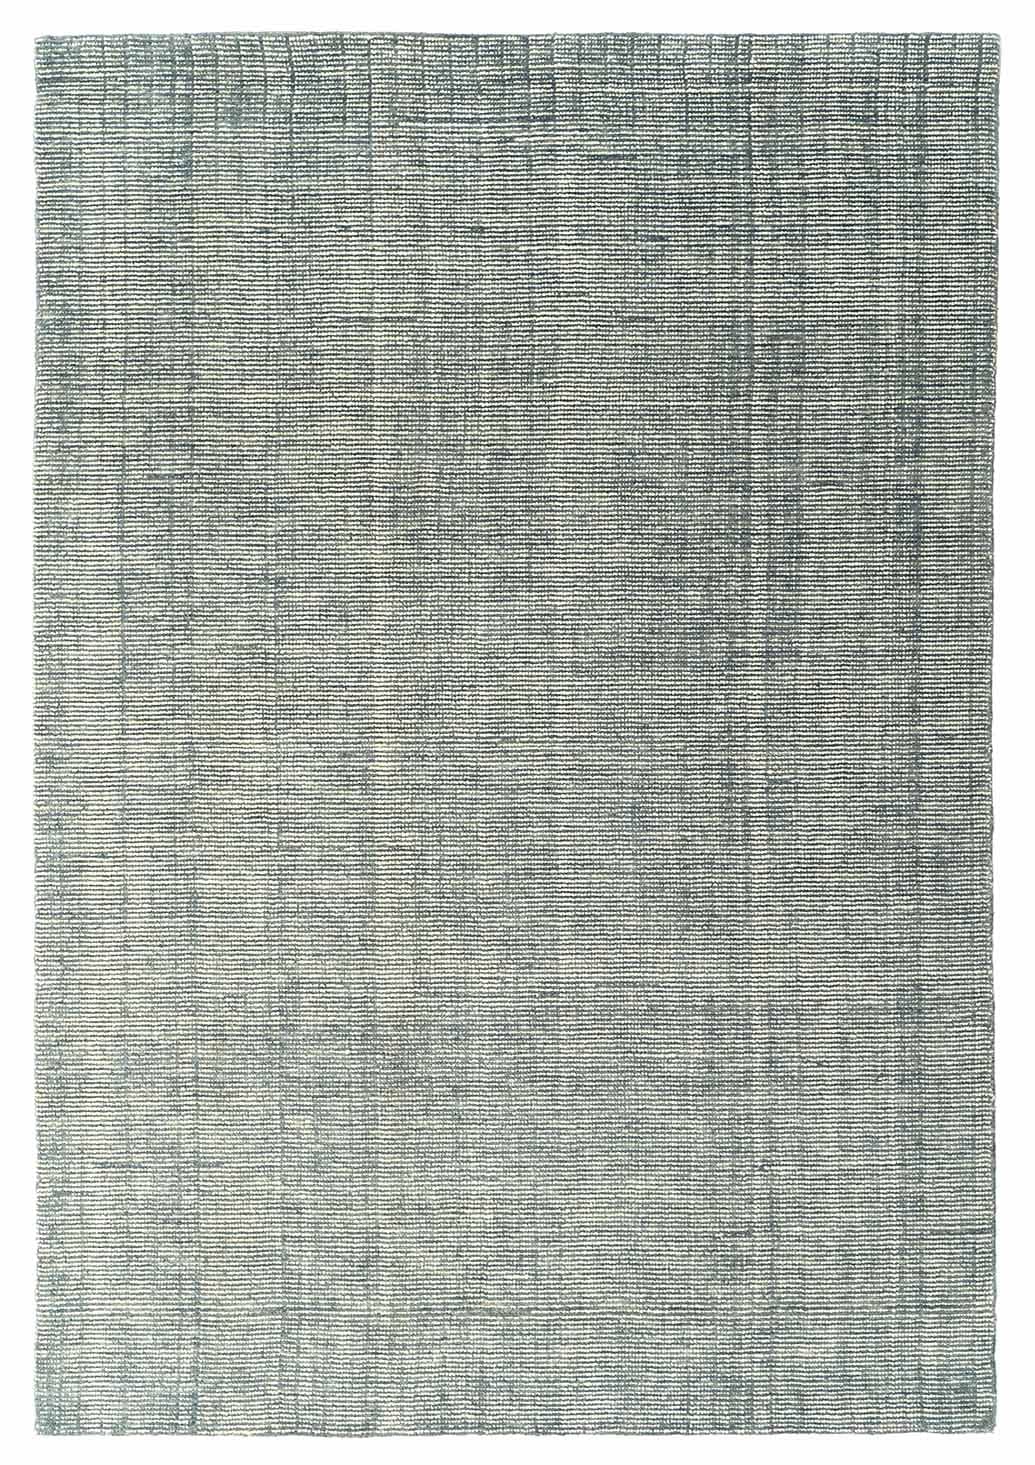 Sage Hand Knotted Wool Rug